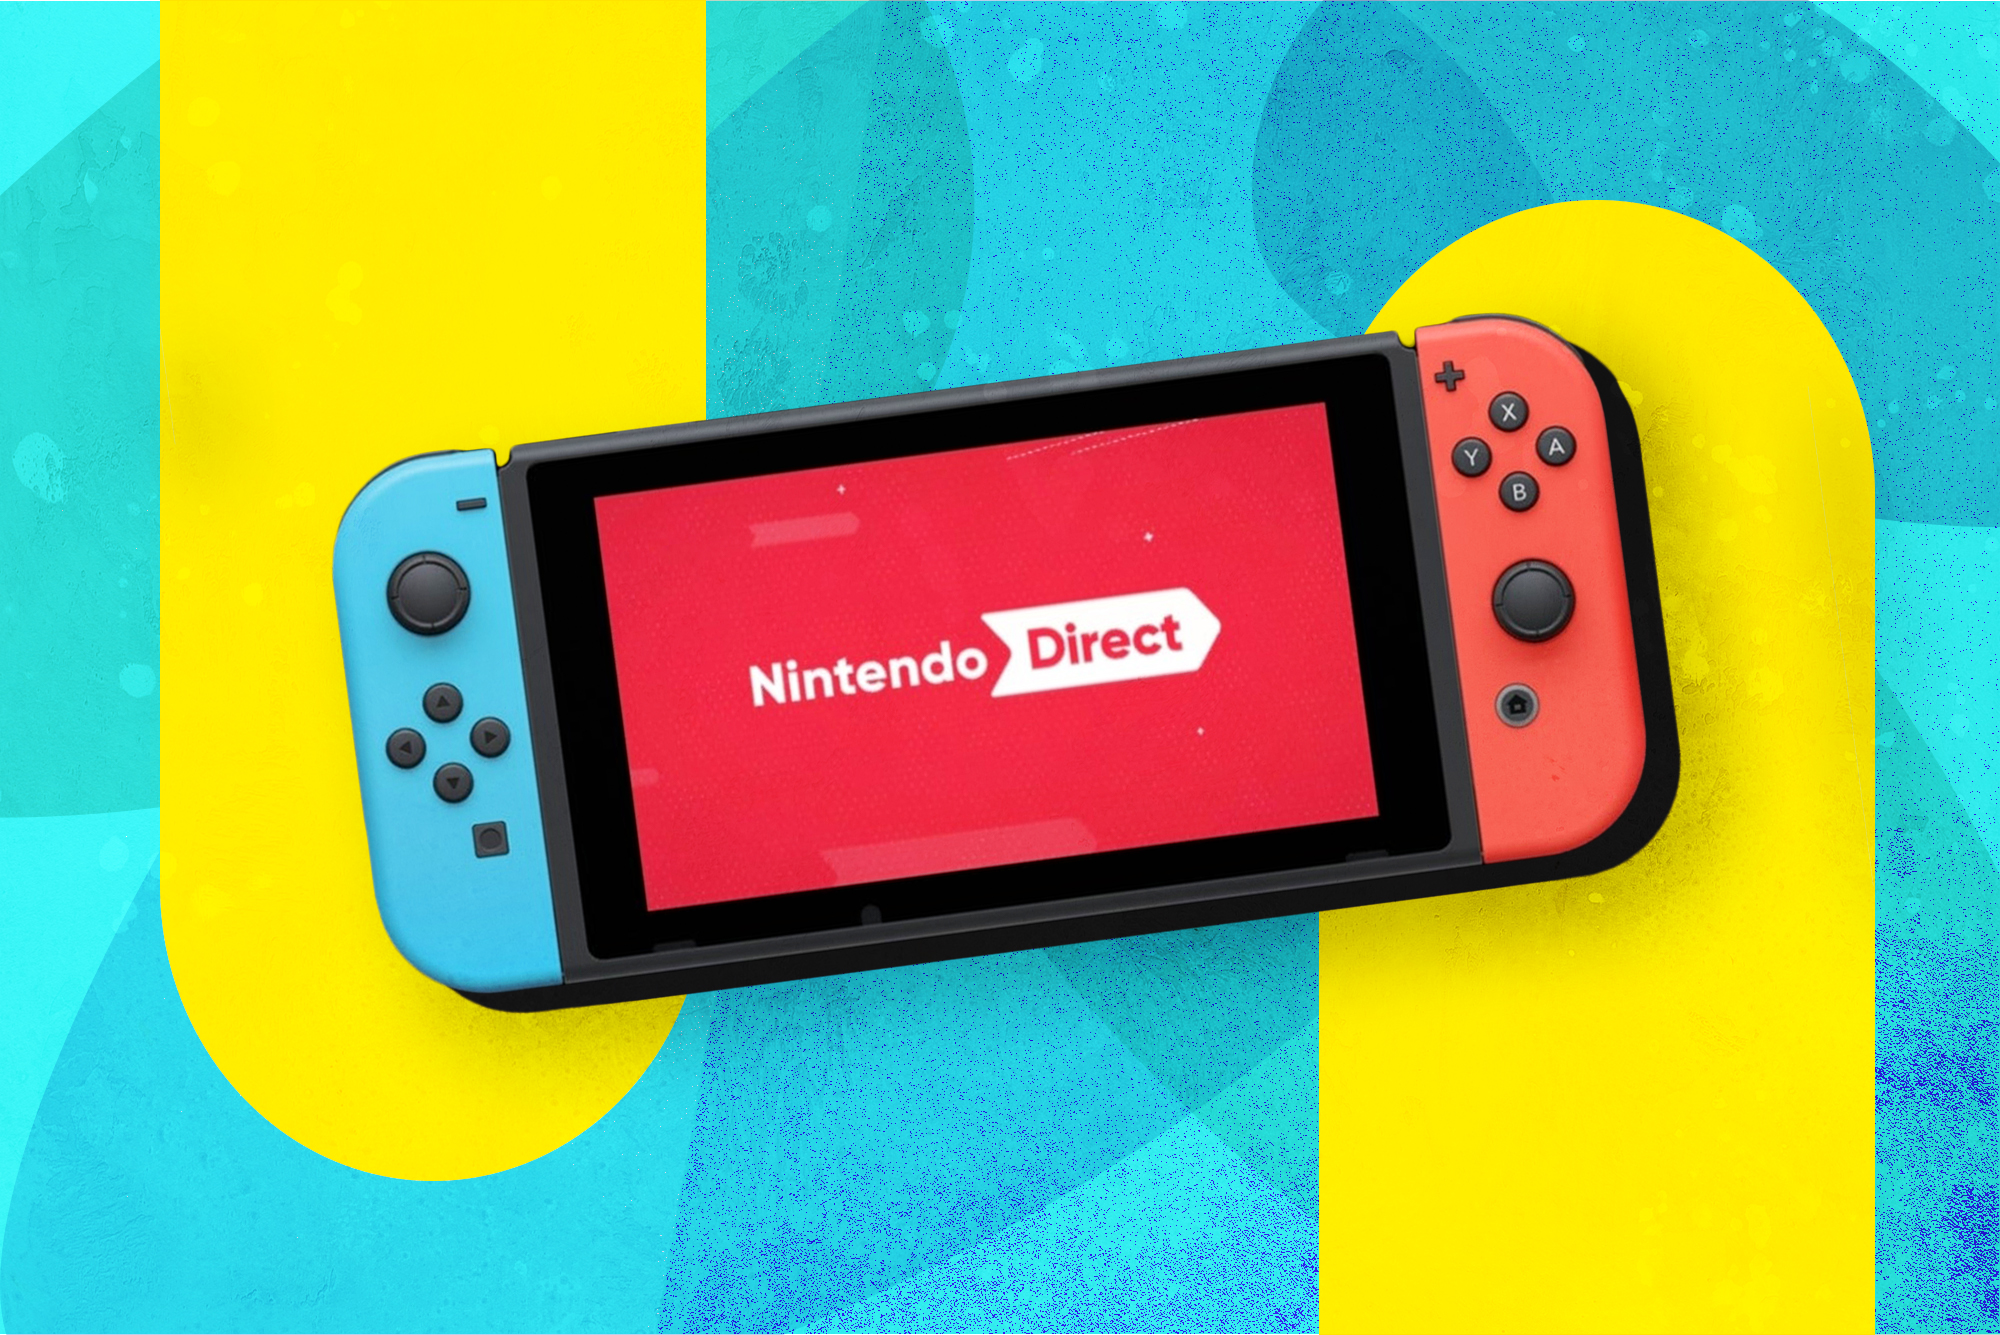 Watch today's Nintendo Direct presentation right here!